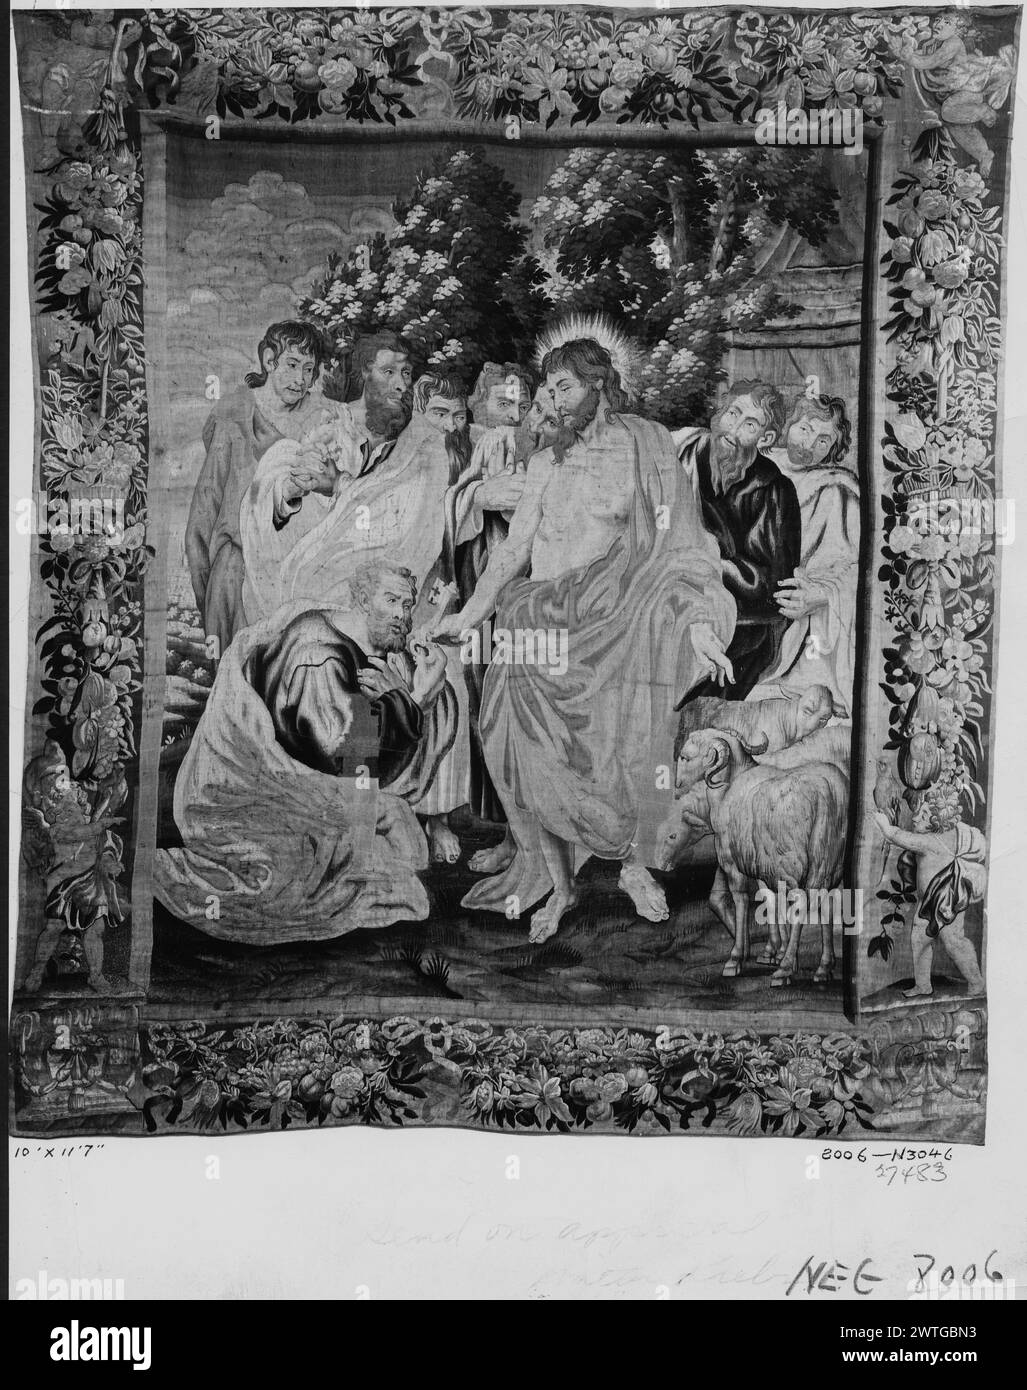 Christ gives keys of heaven to St. Peter. Raphael (Italian, 1483-1520) (designed after) [painter] c. 1650-1670 Tapestry Dimensions: H 11'7 x W 10' Tapestry Materials/Techniques: unknown Culture: Flemish Weaving Center: Brussels Ownership History: French & Co. purchased from Mrs. Adrienne H. Joline, received 9/15/1924, invoiced [1]/19/1925; sold to G. C. Booth 7/26/1939. Christ, having just given kneeling Peter key to heaven, stands with flock of lambs; group of apostles surround Peter (John 21:15-17) (BRD) garlands of flowers & fruit tied with ribbons; putti near each corner This panel is a pa Stock Photo